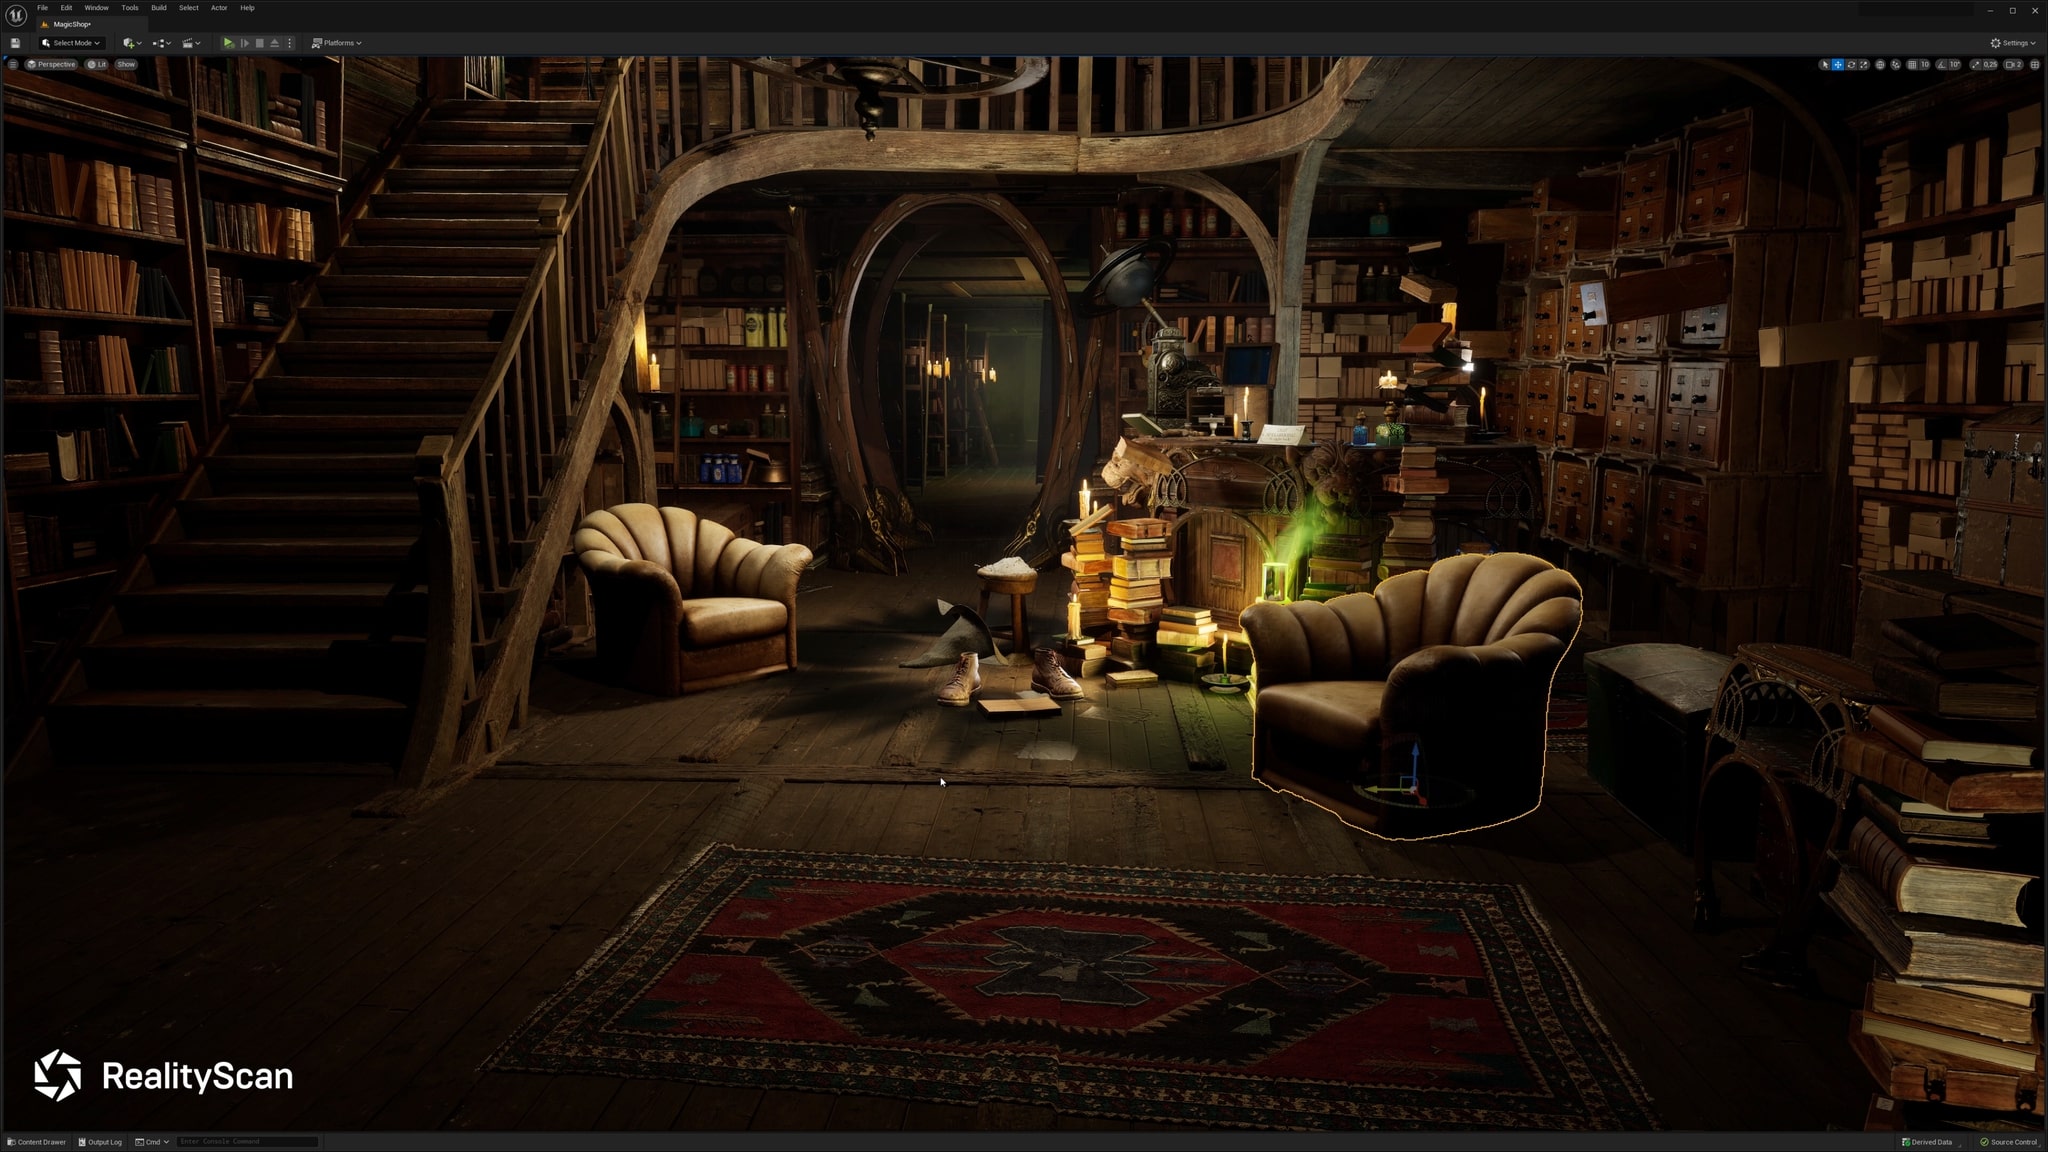 RealityScan is now free to download on iOS - Unreal Engine